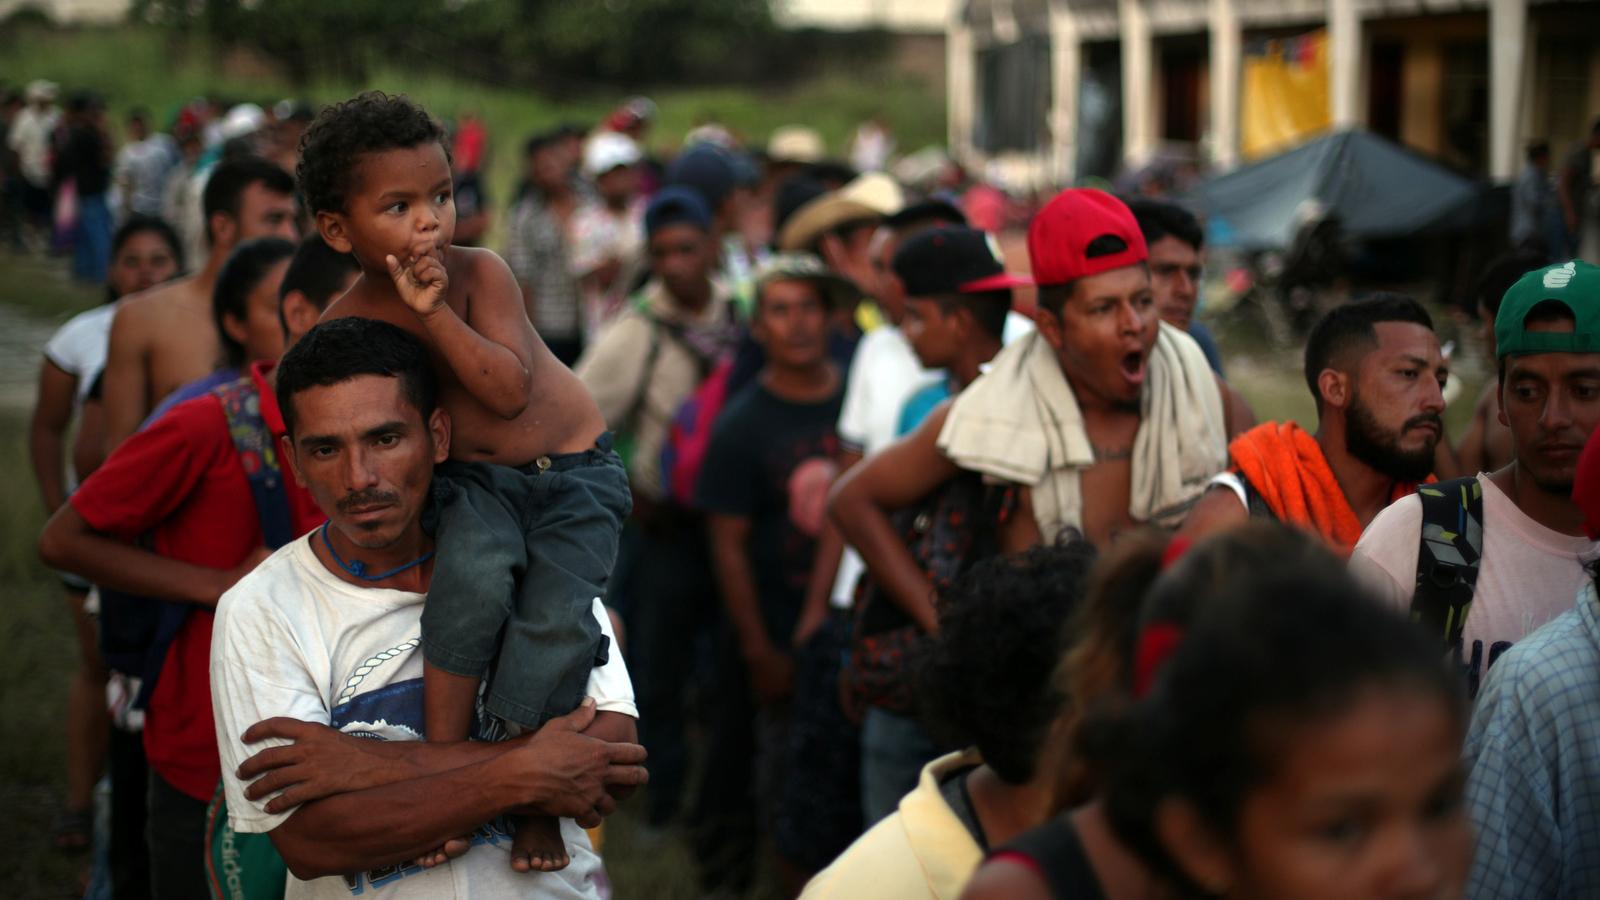 A large group of male migrants from Central America stand in line for food donations